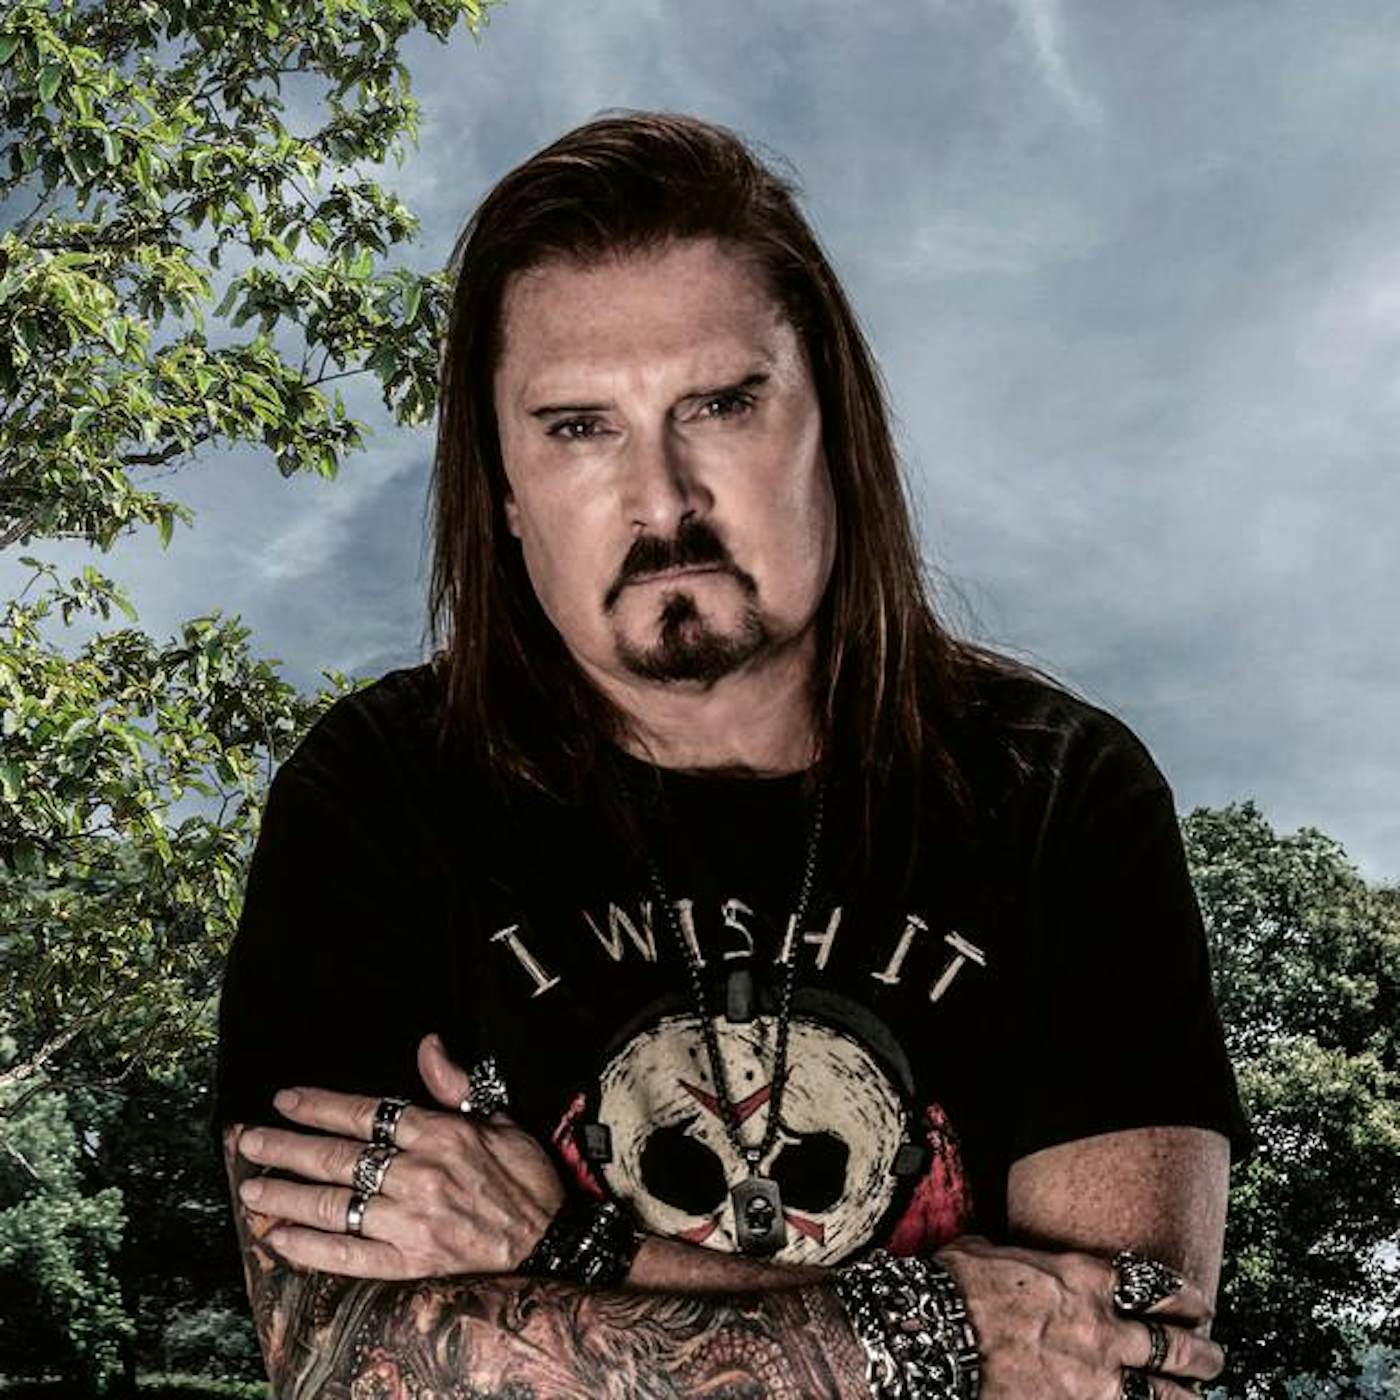 James Labrie